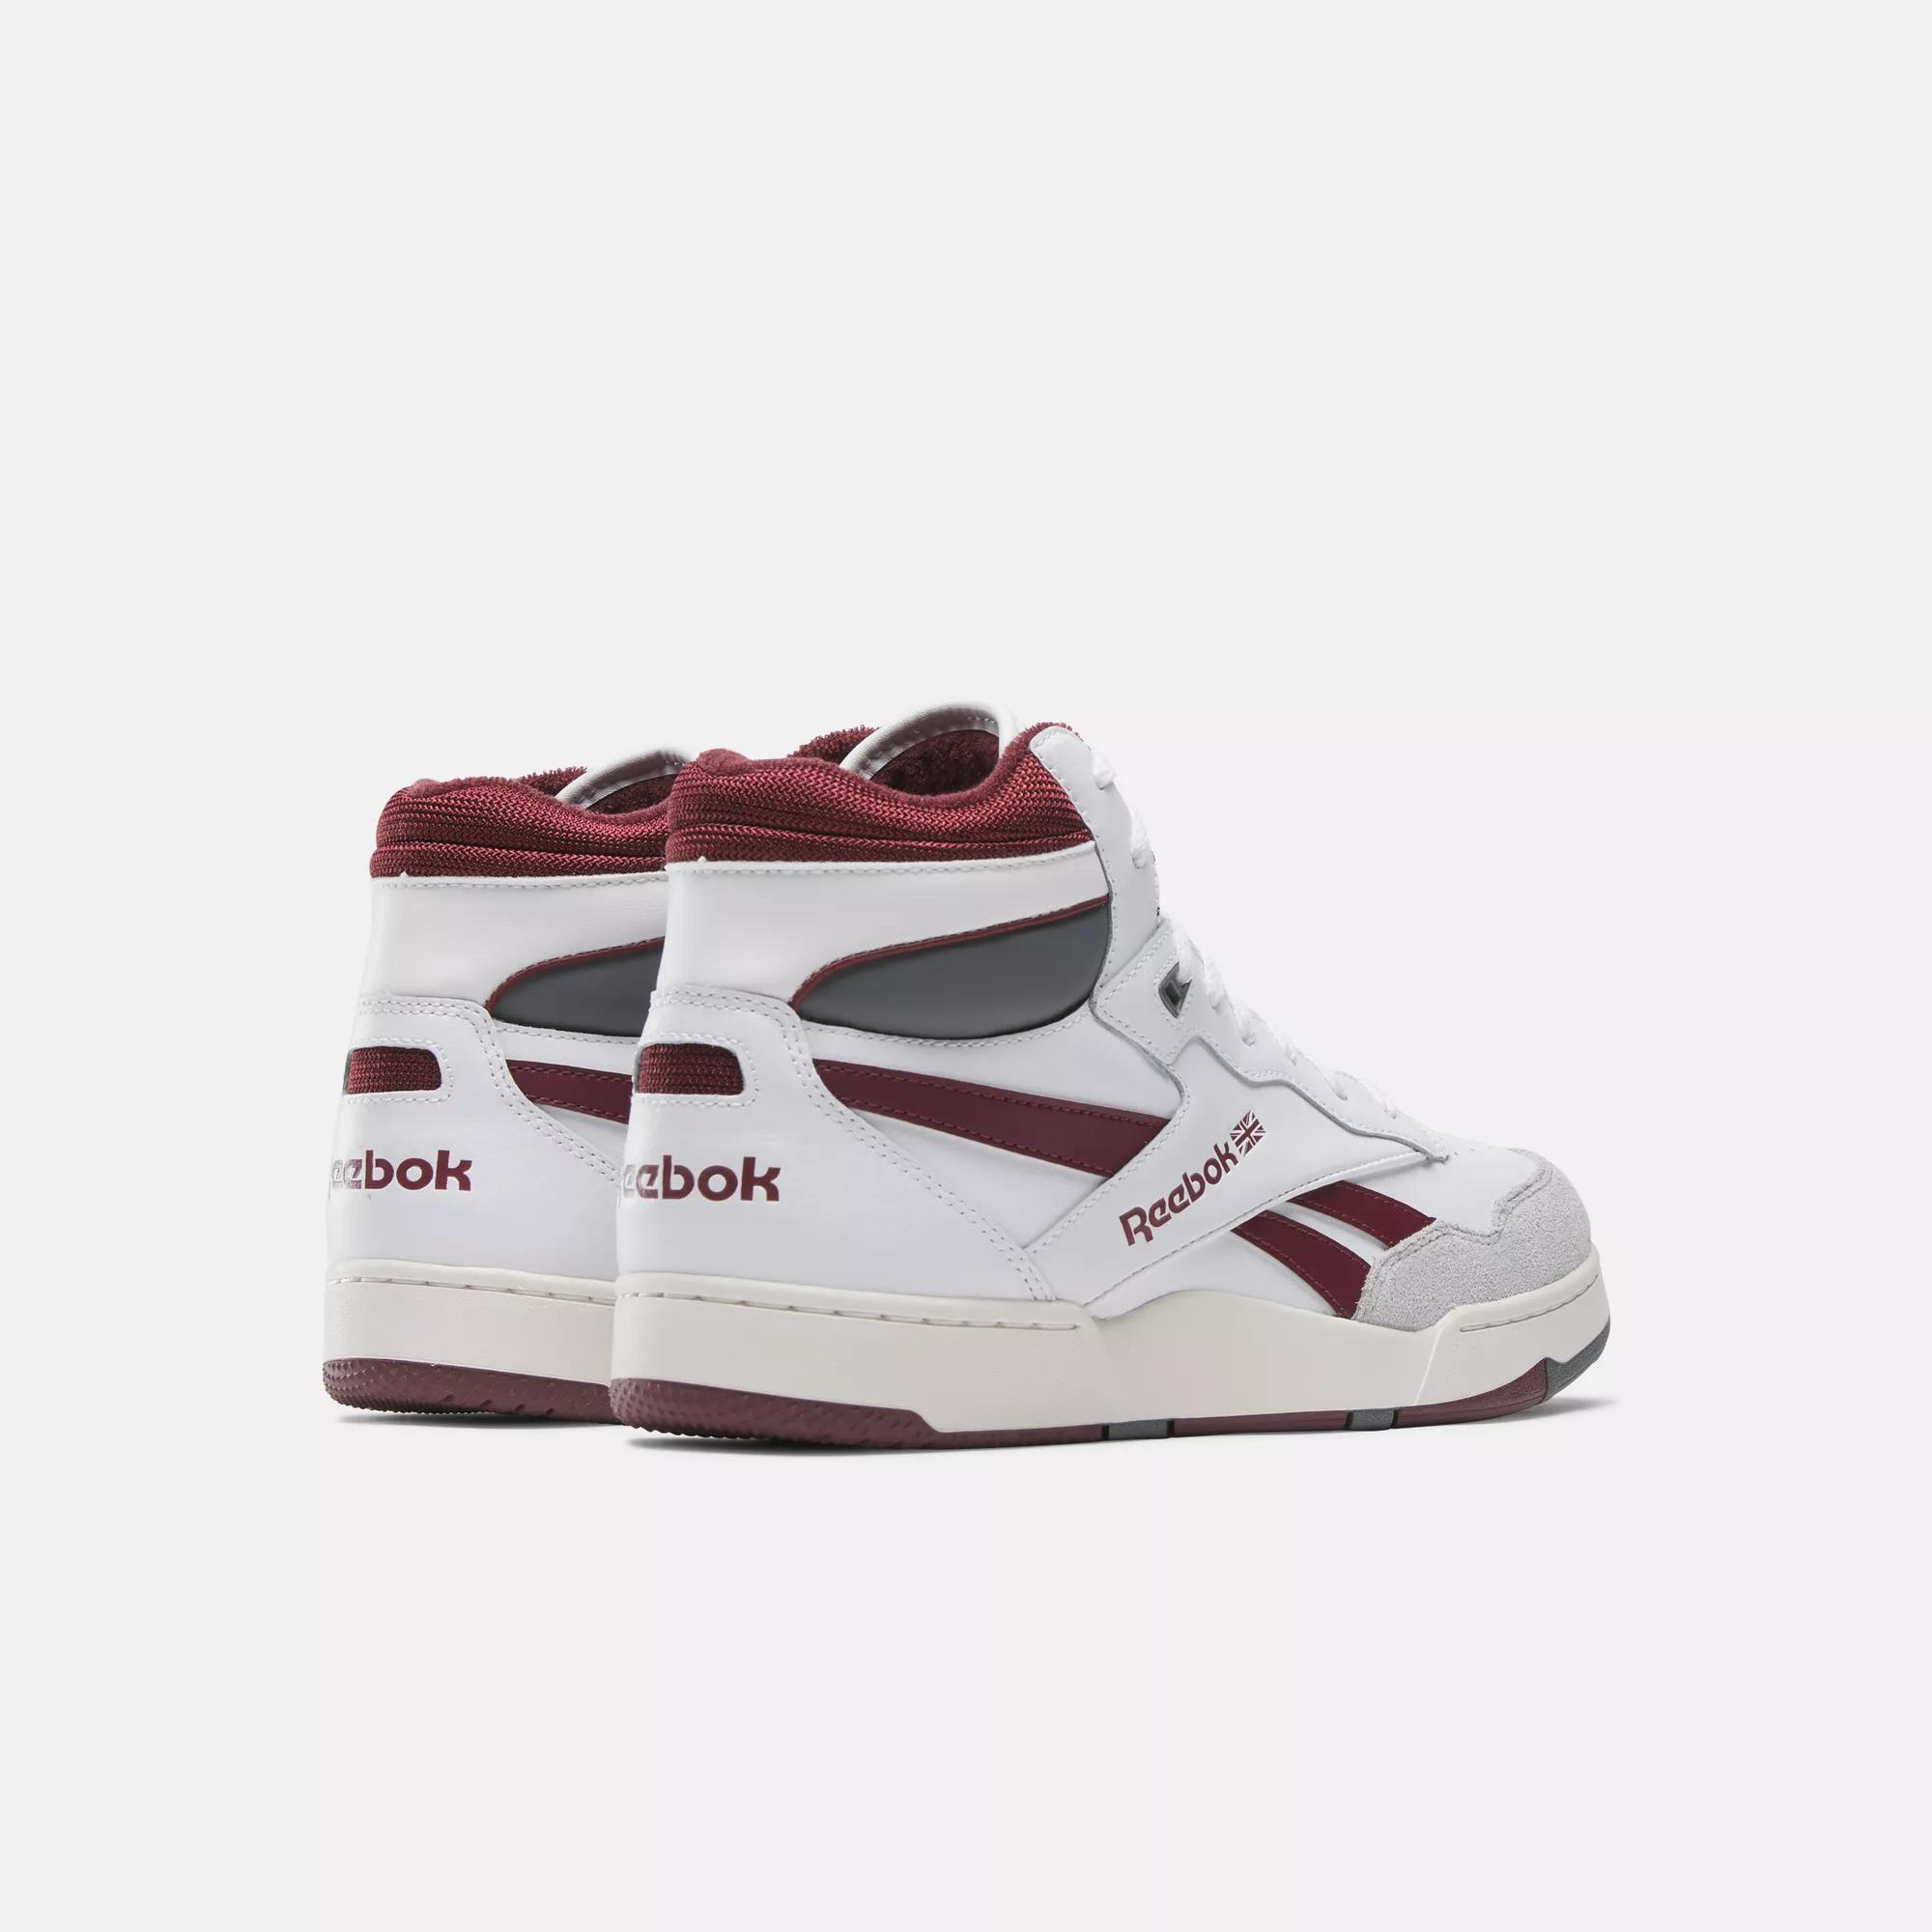 BB 4000 Mid Shoes White / Classic Maroon / Pure Grey 6 | Reebok